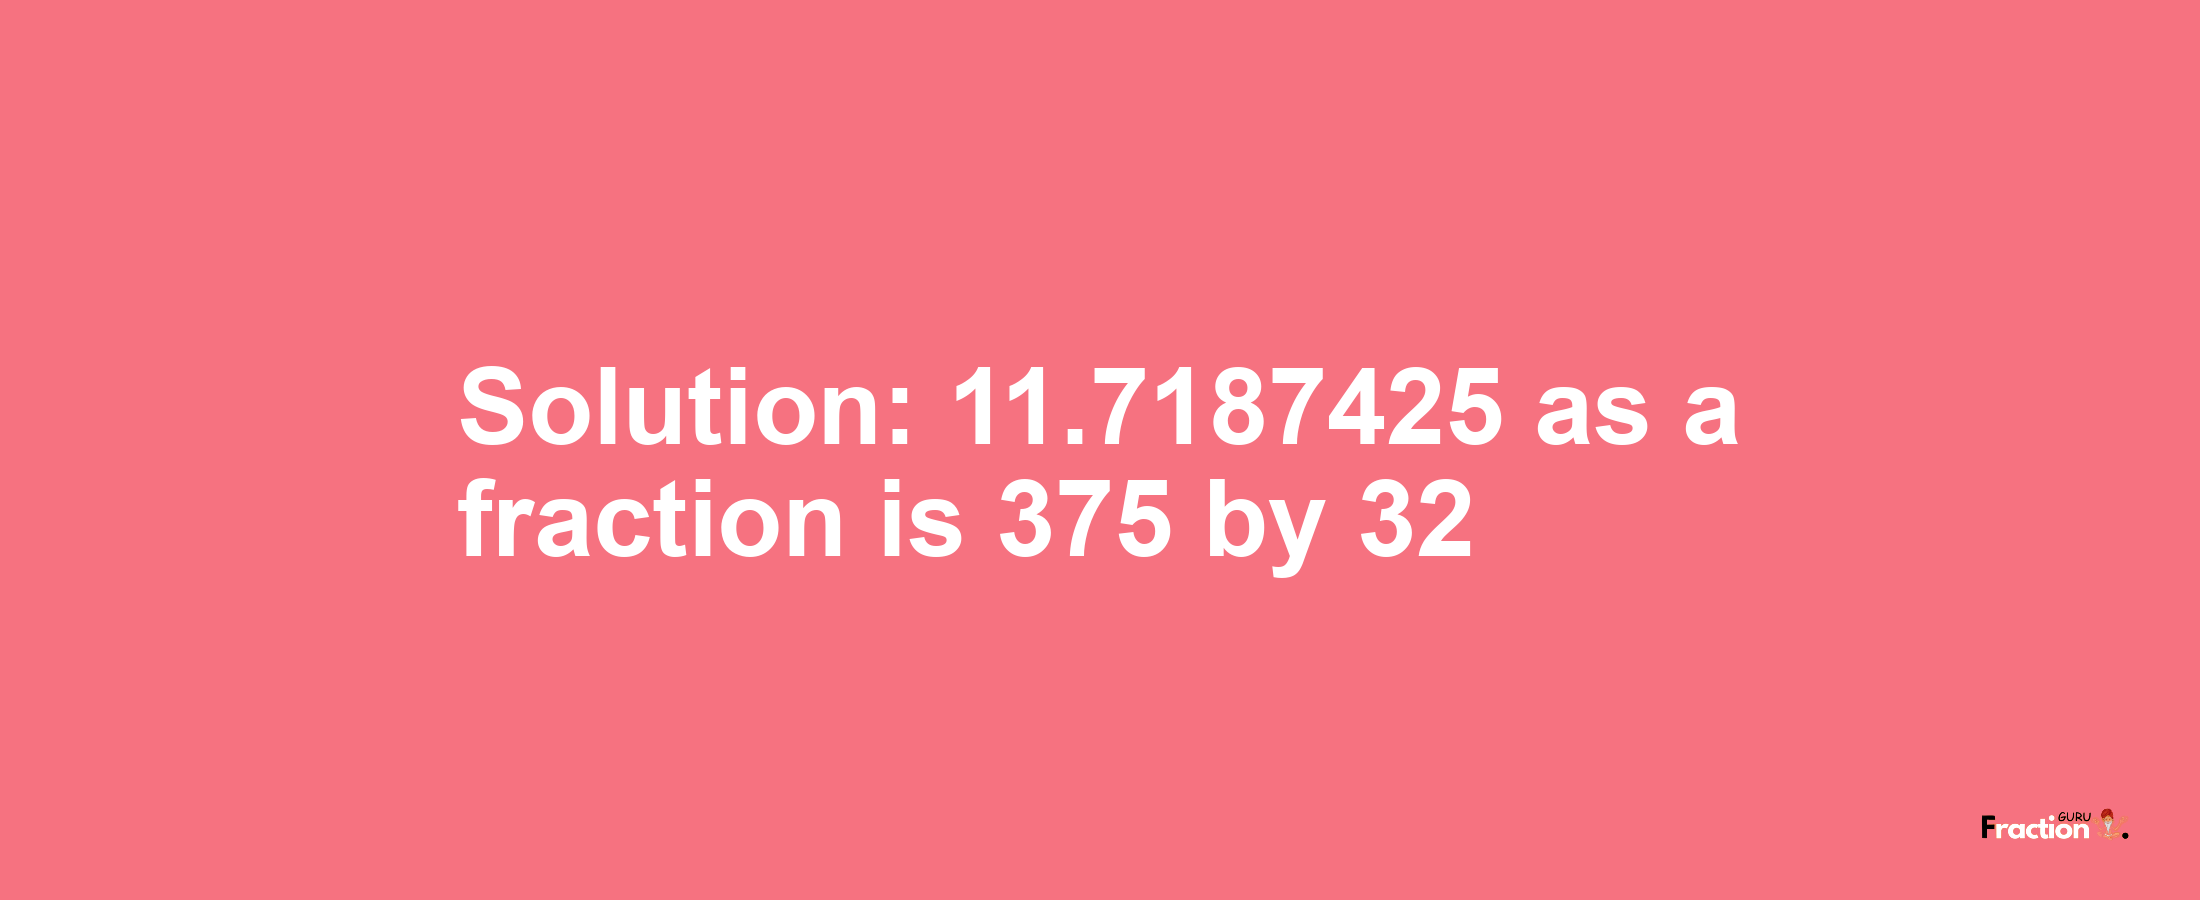 Solution:11.7187425 as a fraction is 375/32